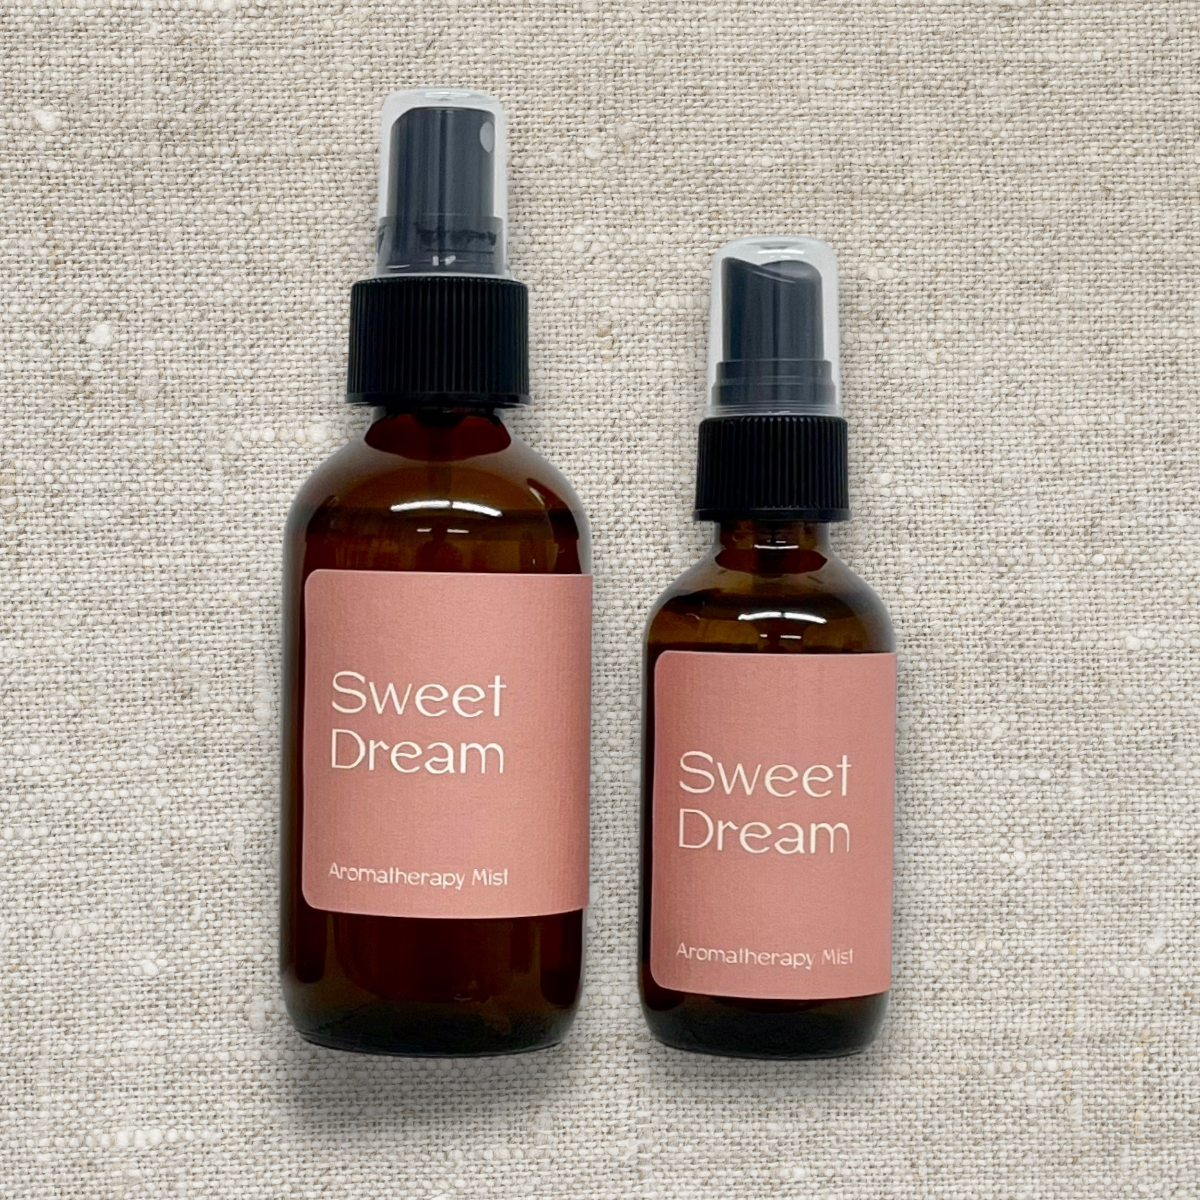 species by the thousands / sweet dream spray